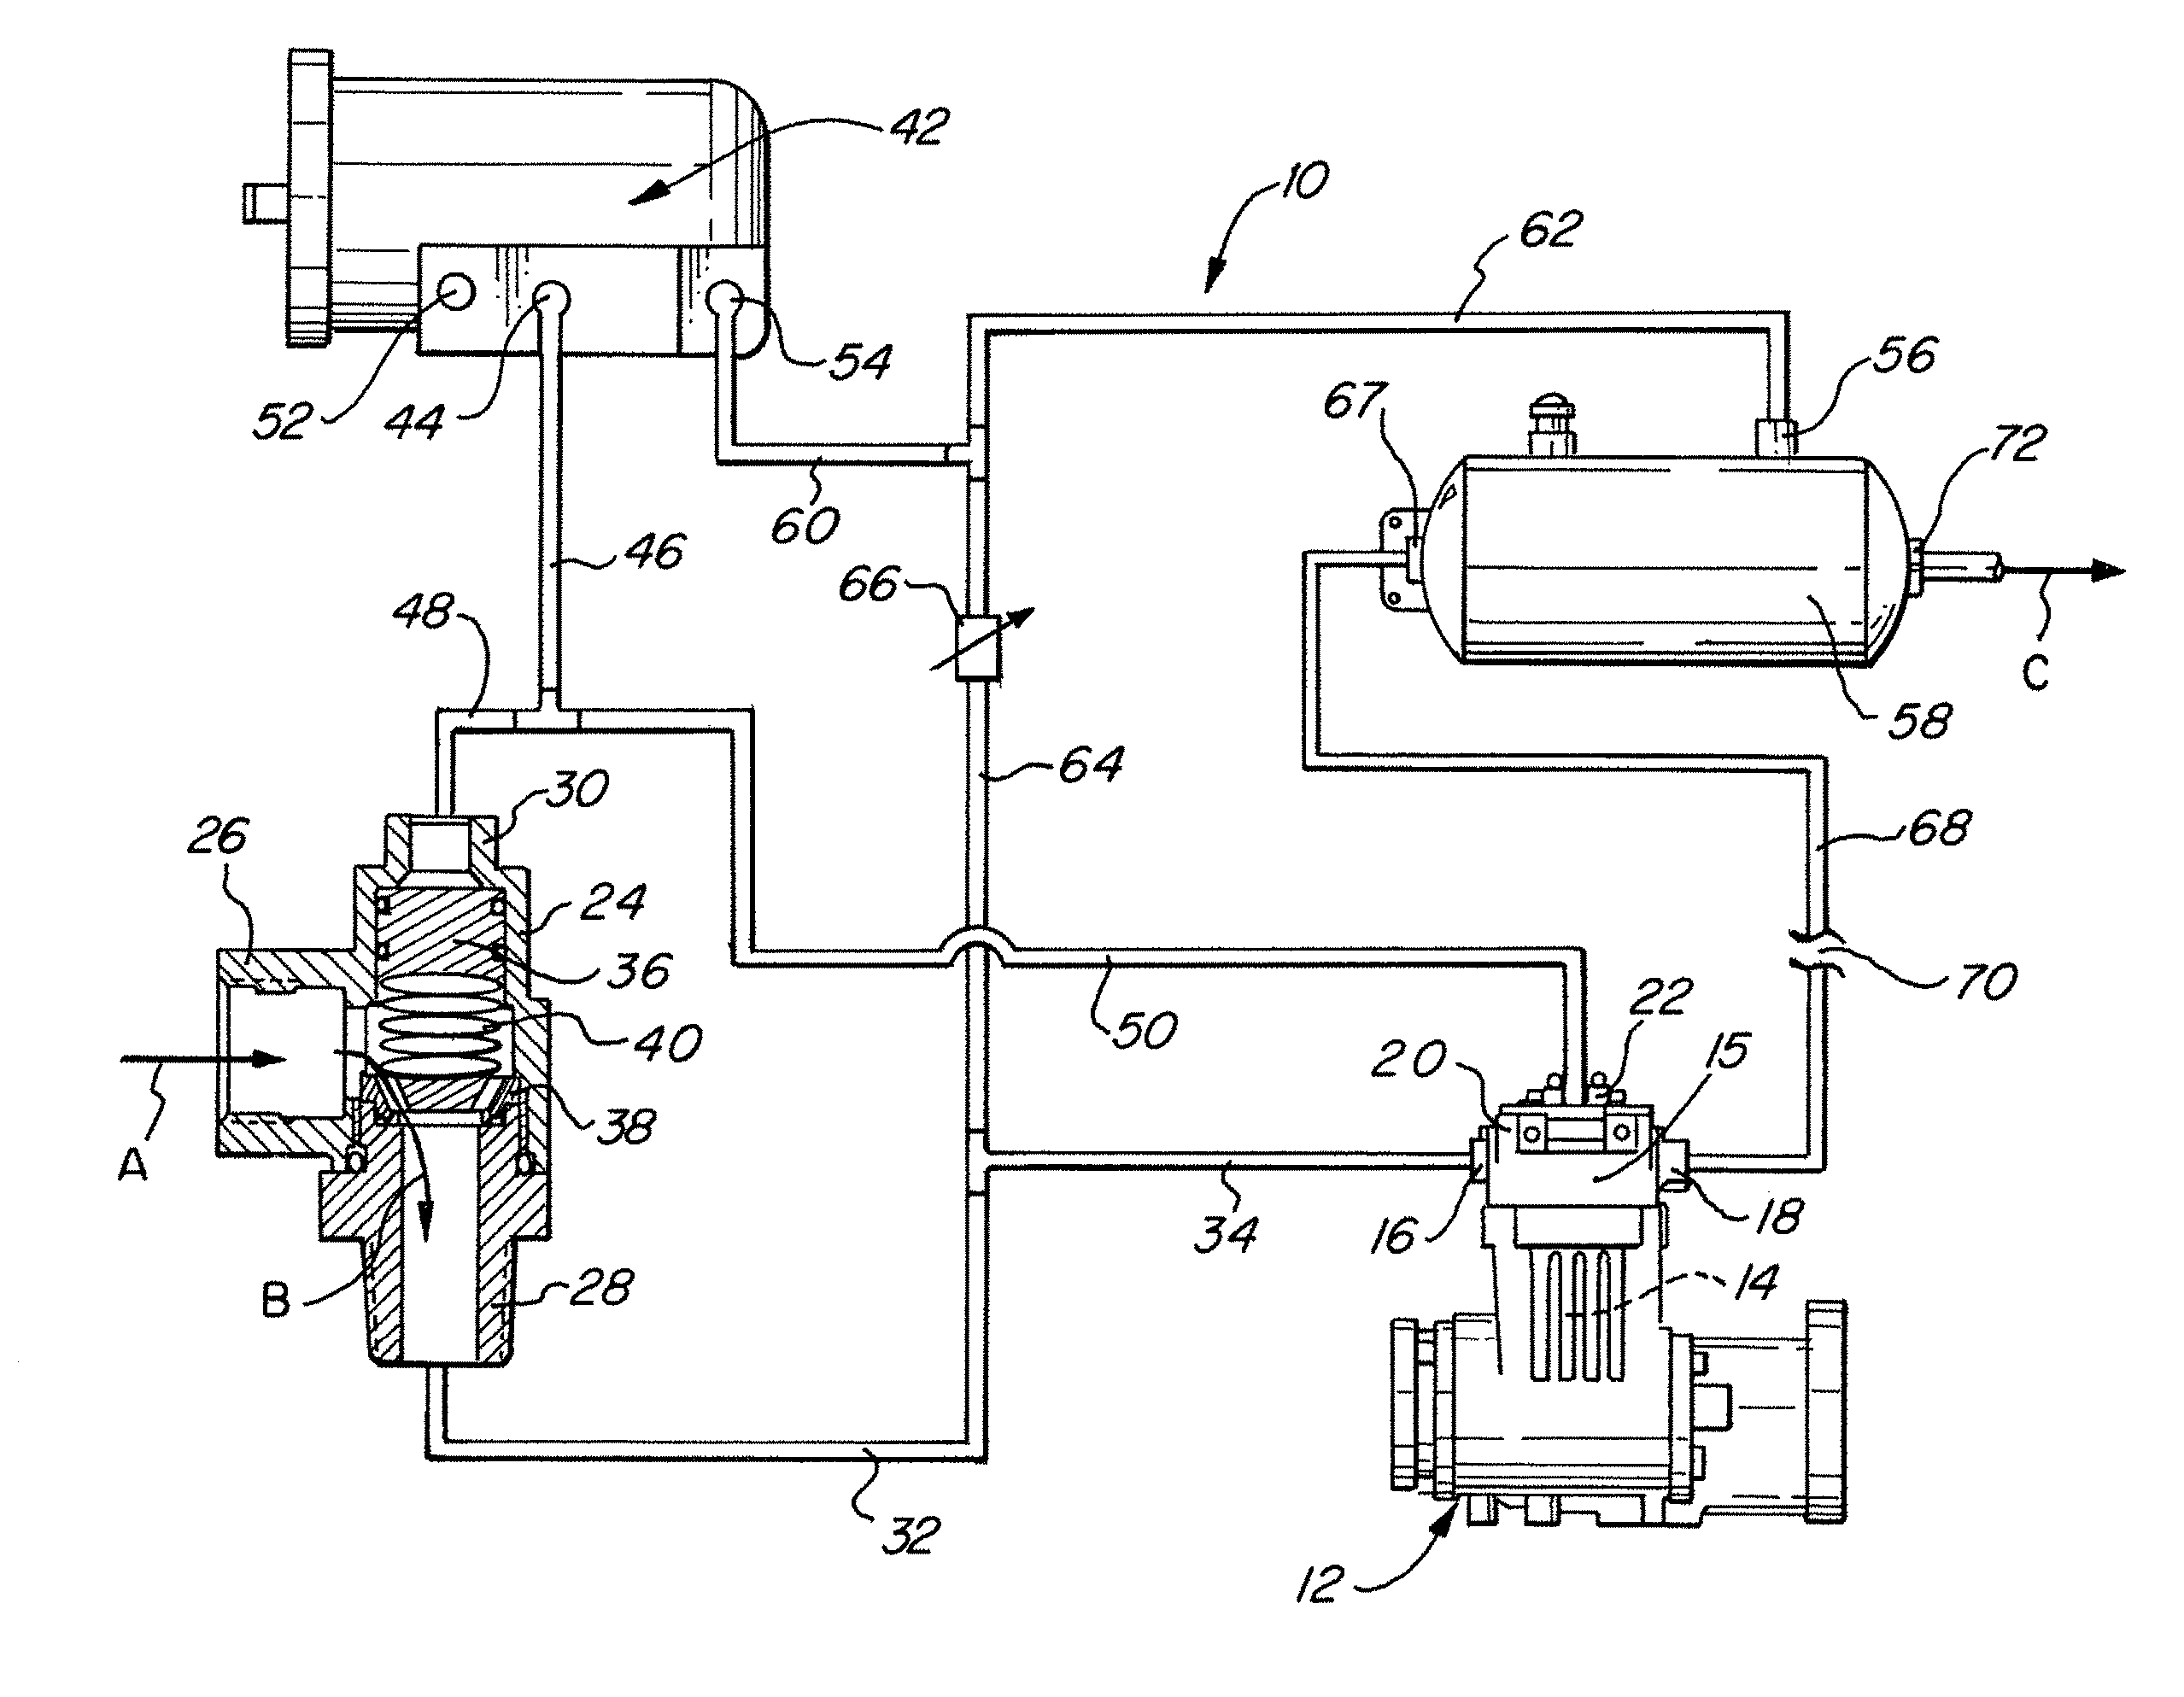 Air supply system with reduced oil passing in compressor